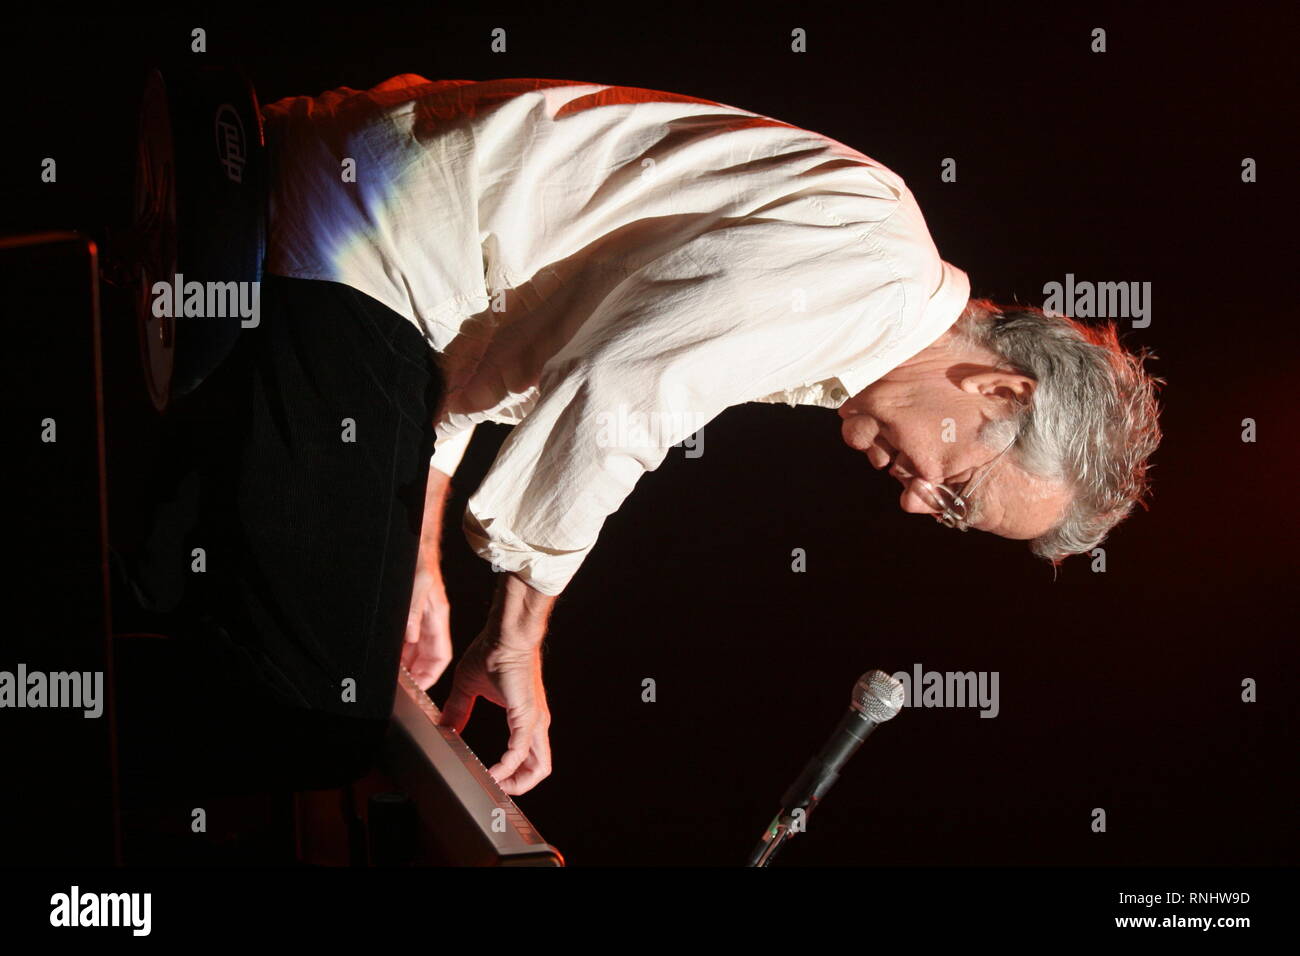 Ray Manzarek of The Doors is shown performing during a 'live' concert appearance. Stock Photo